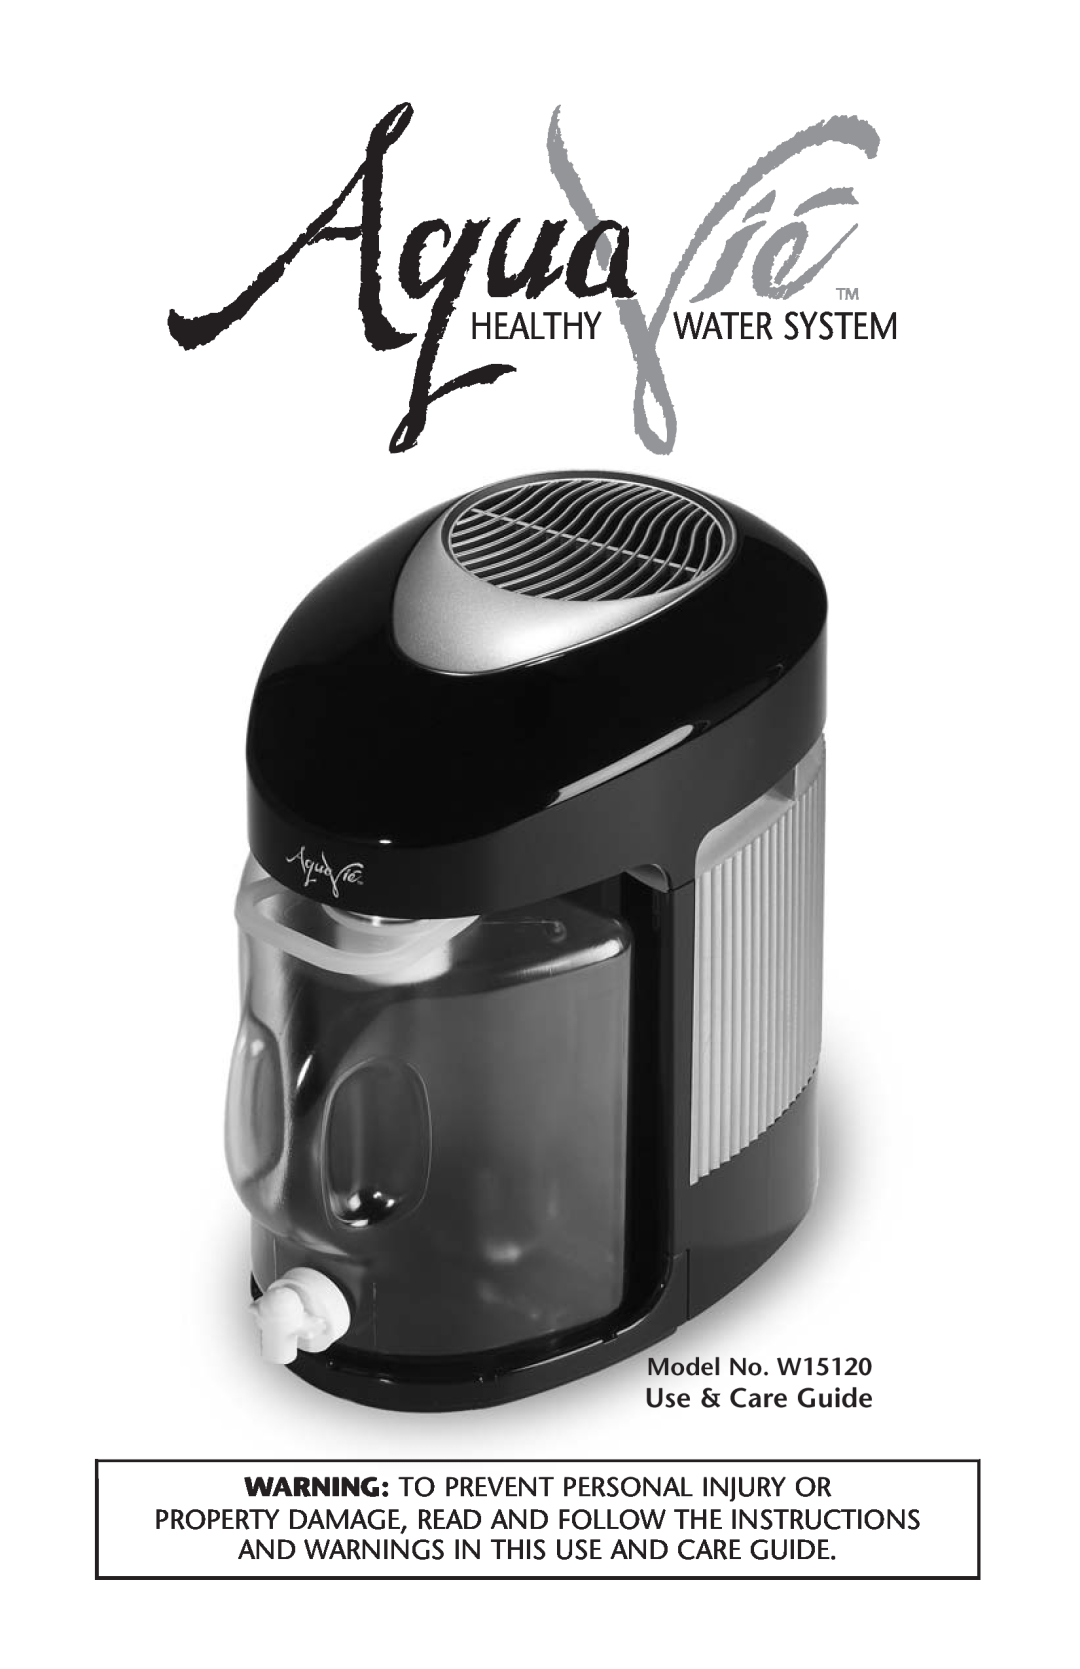 Regal Ware W15120 manual Healthy, Water System 